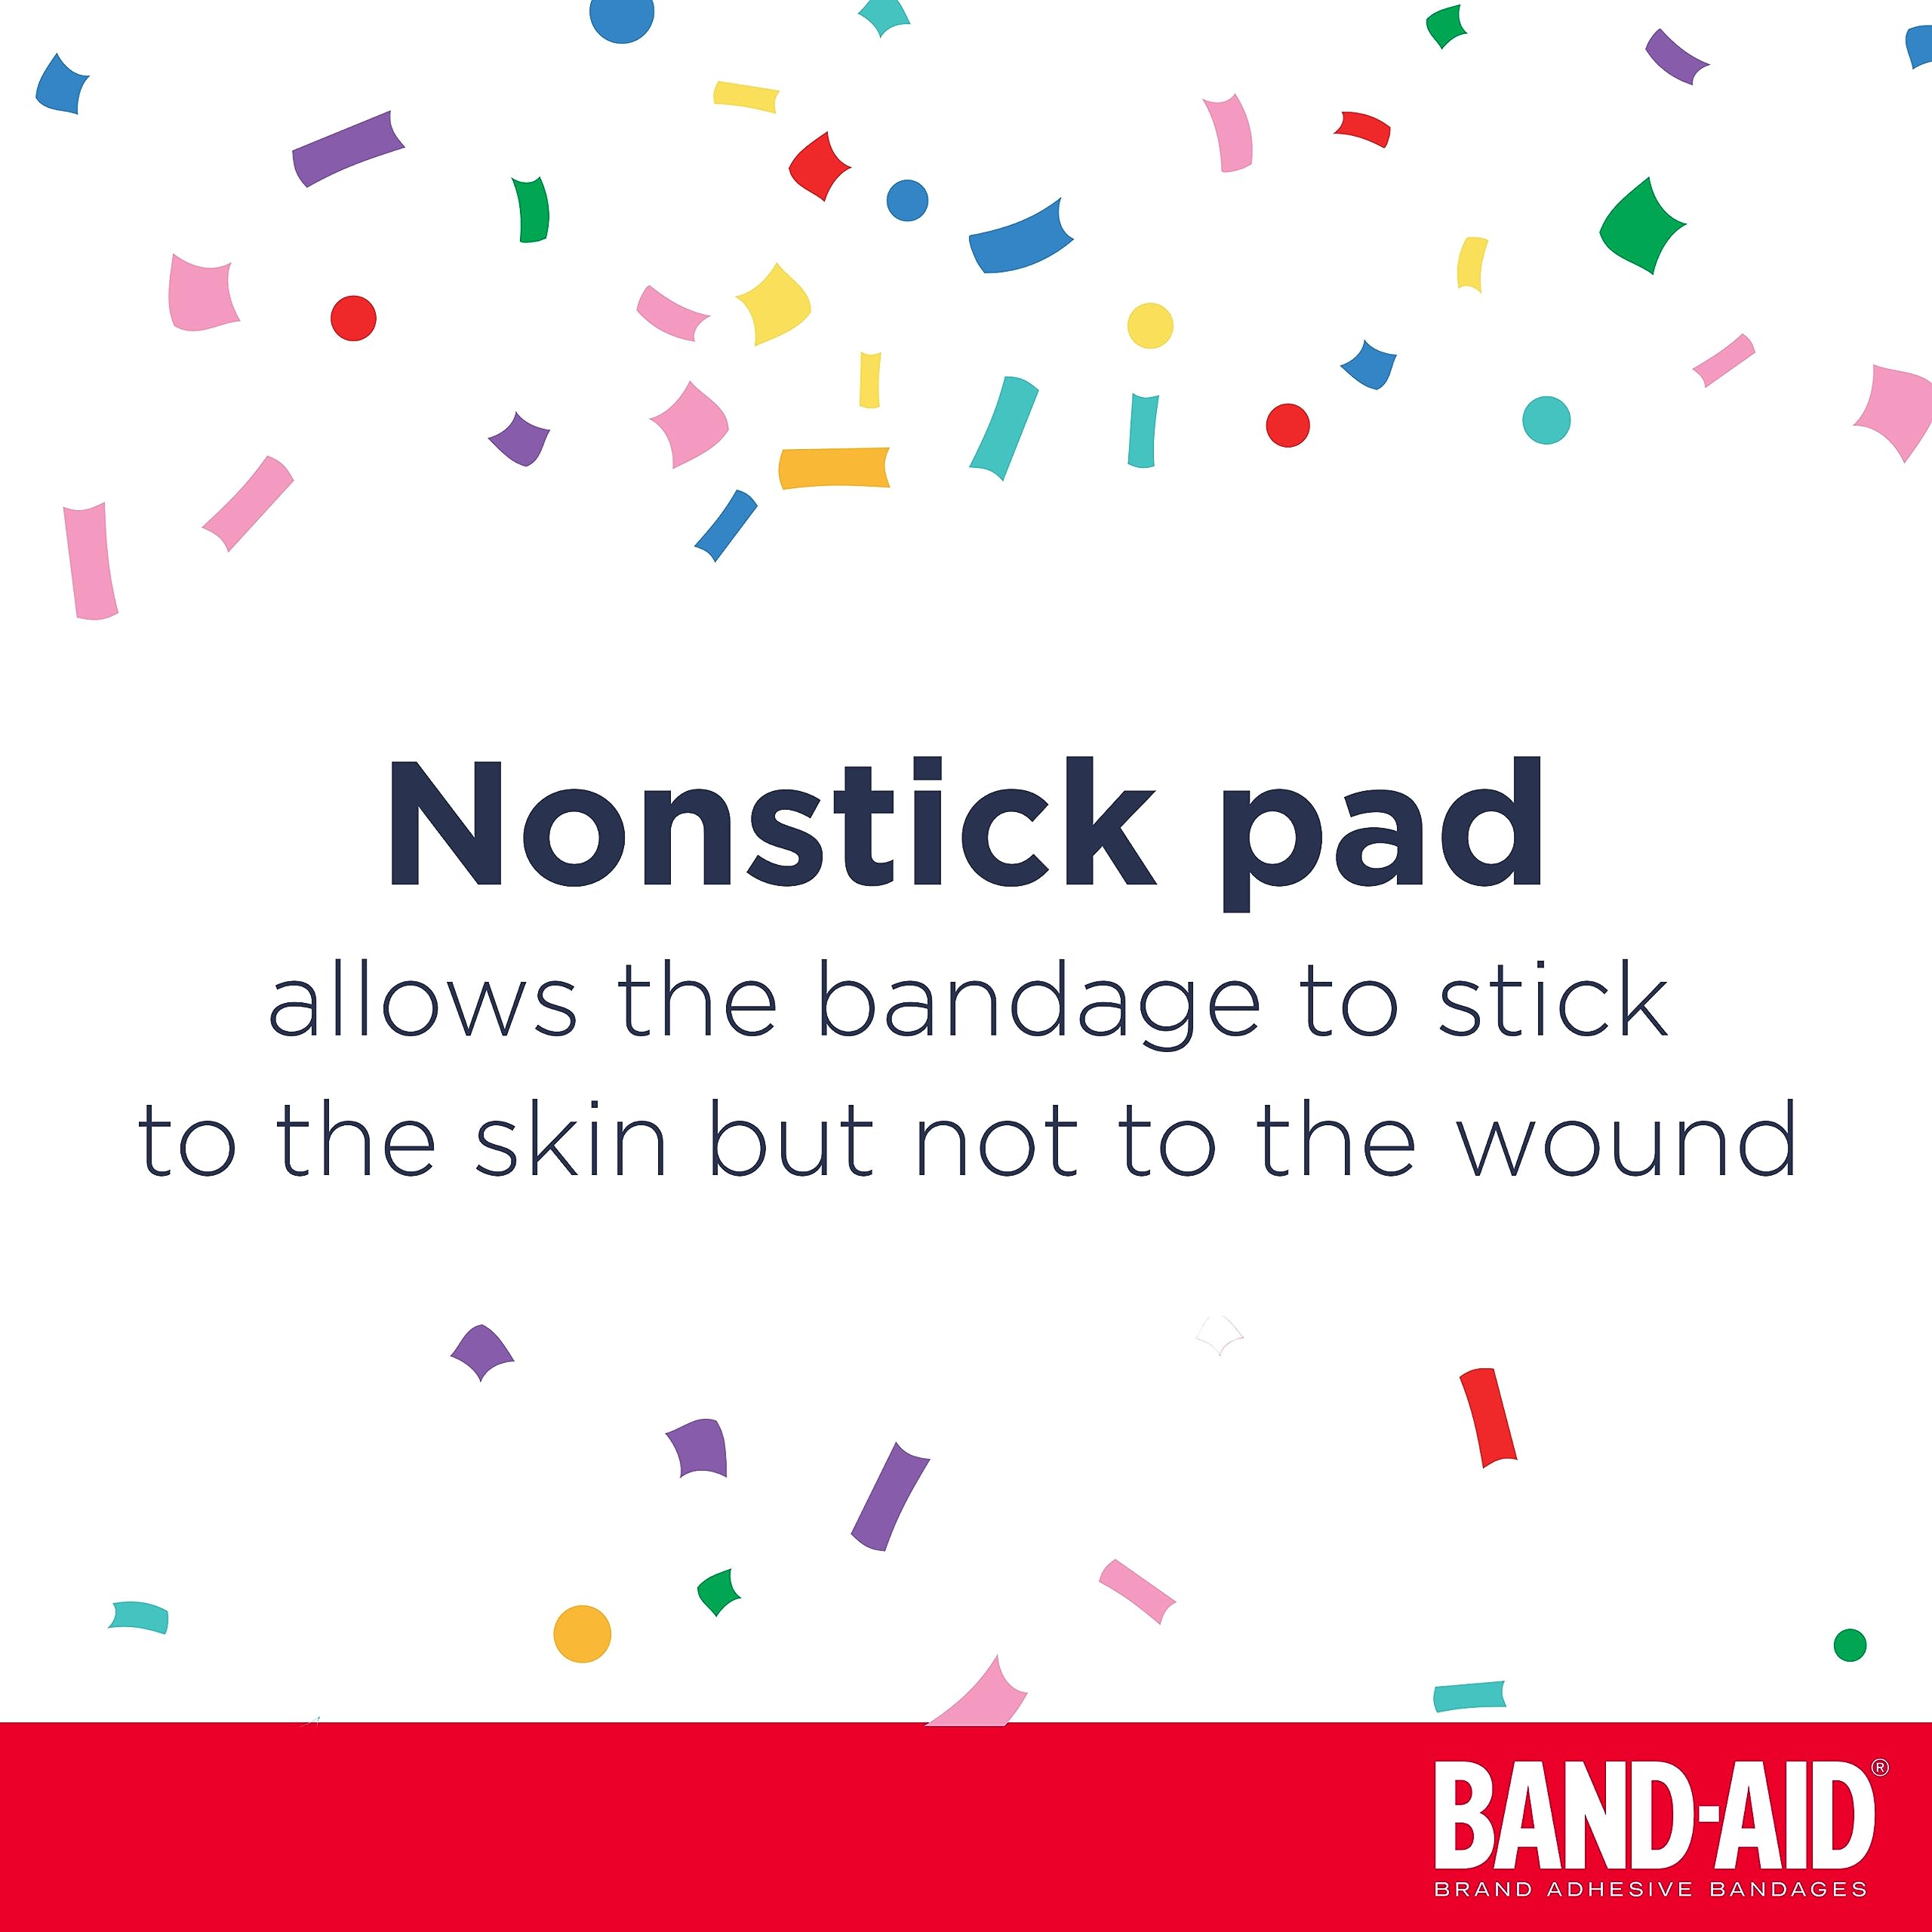 Band-Aid Brand Adhesive First Aid Bandages for Minor Cuts & Scrapes, Wound Care Featuring Nickelodeon TMNT Characters, Fun Bandages for Kids & Toddlers, Sterile, Assorted Sizes, 20 Ct